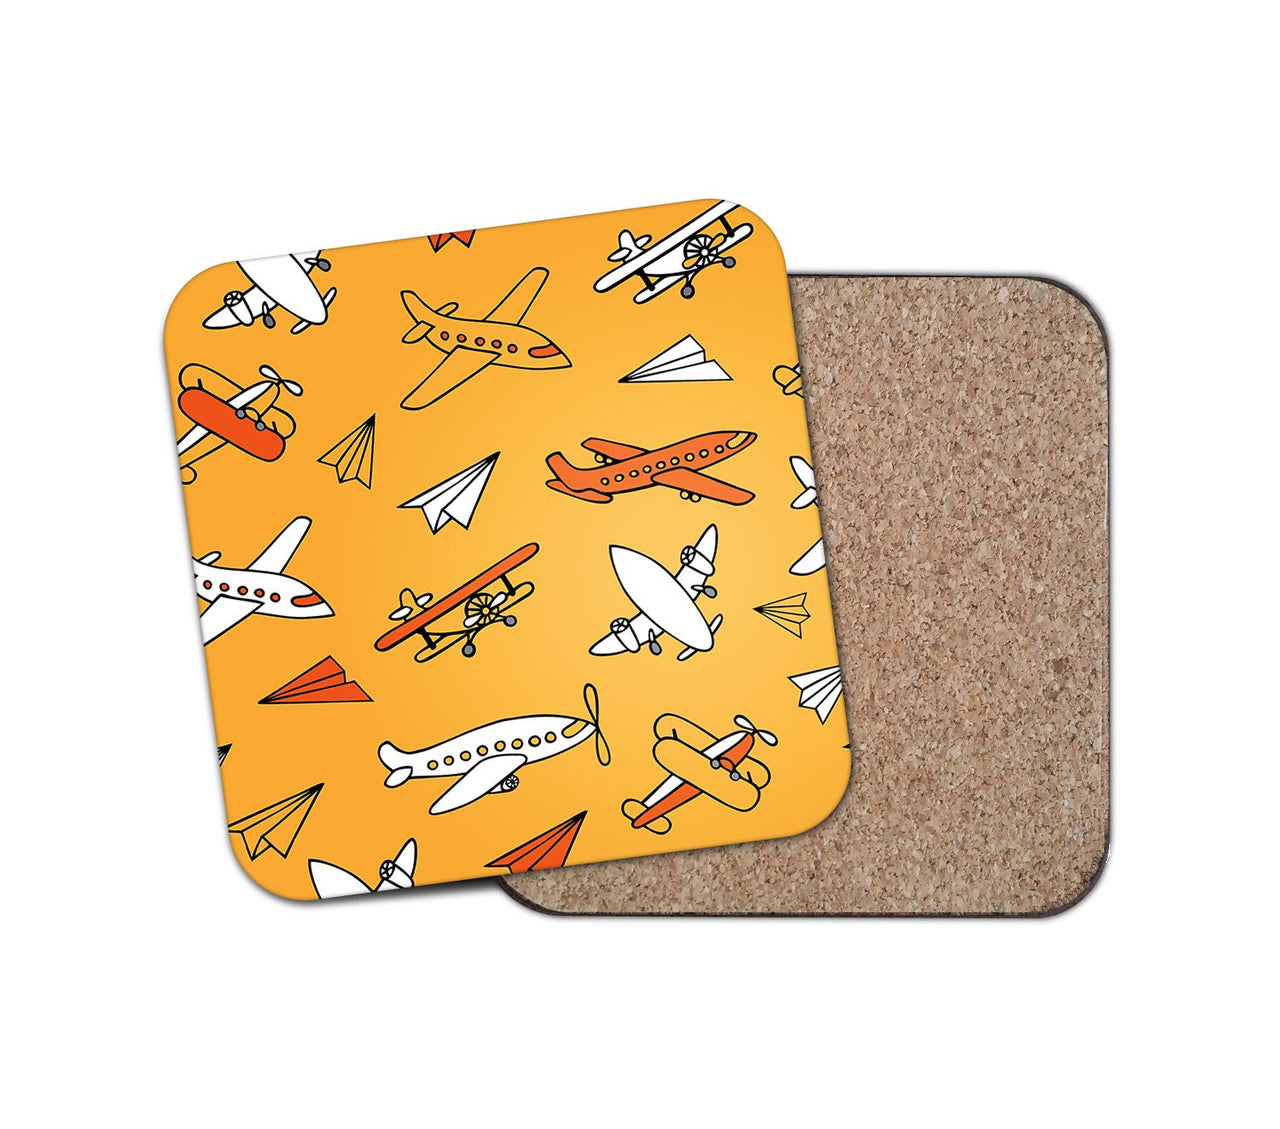 Super Drawings of Airplanes Designed Coasters